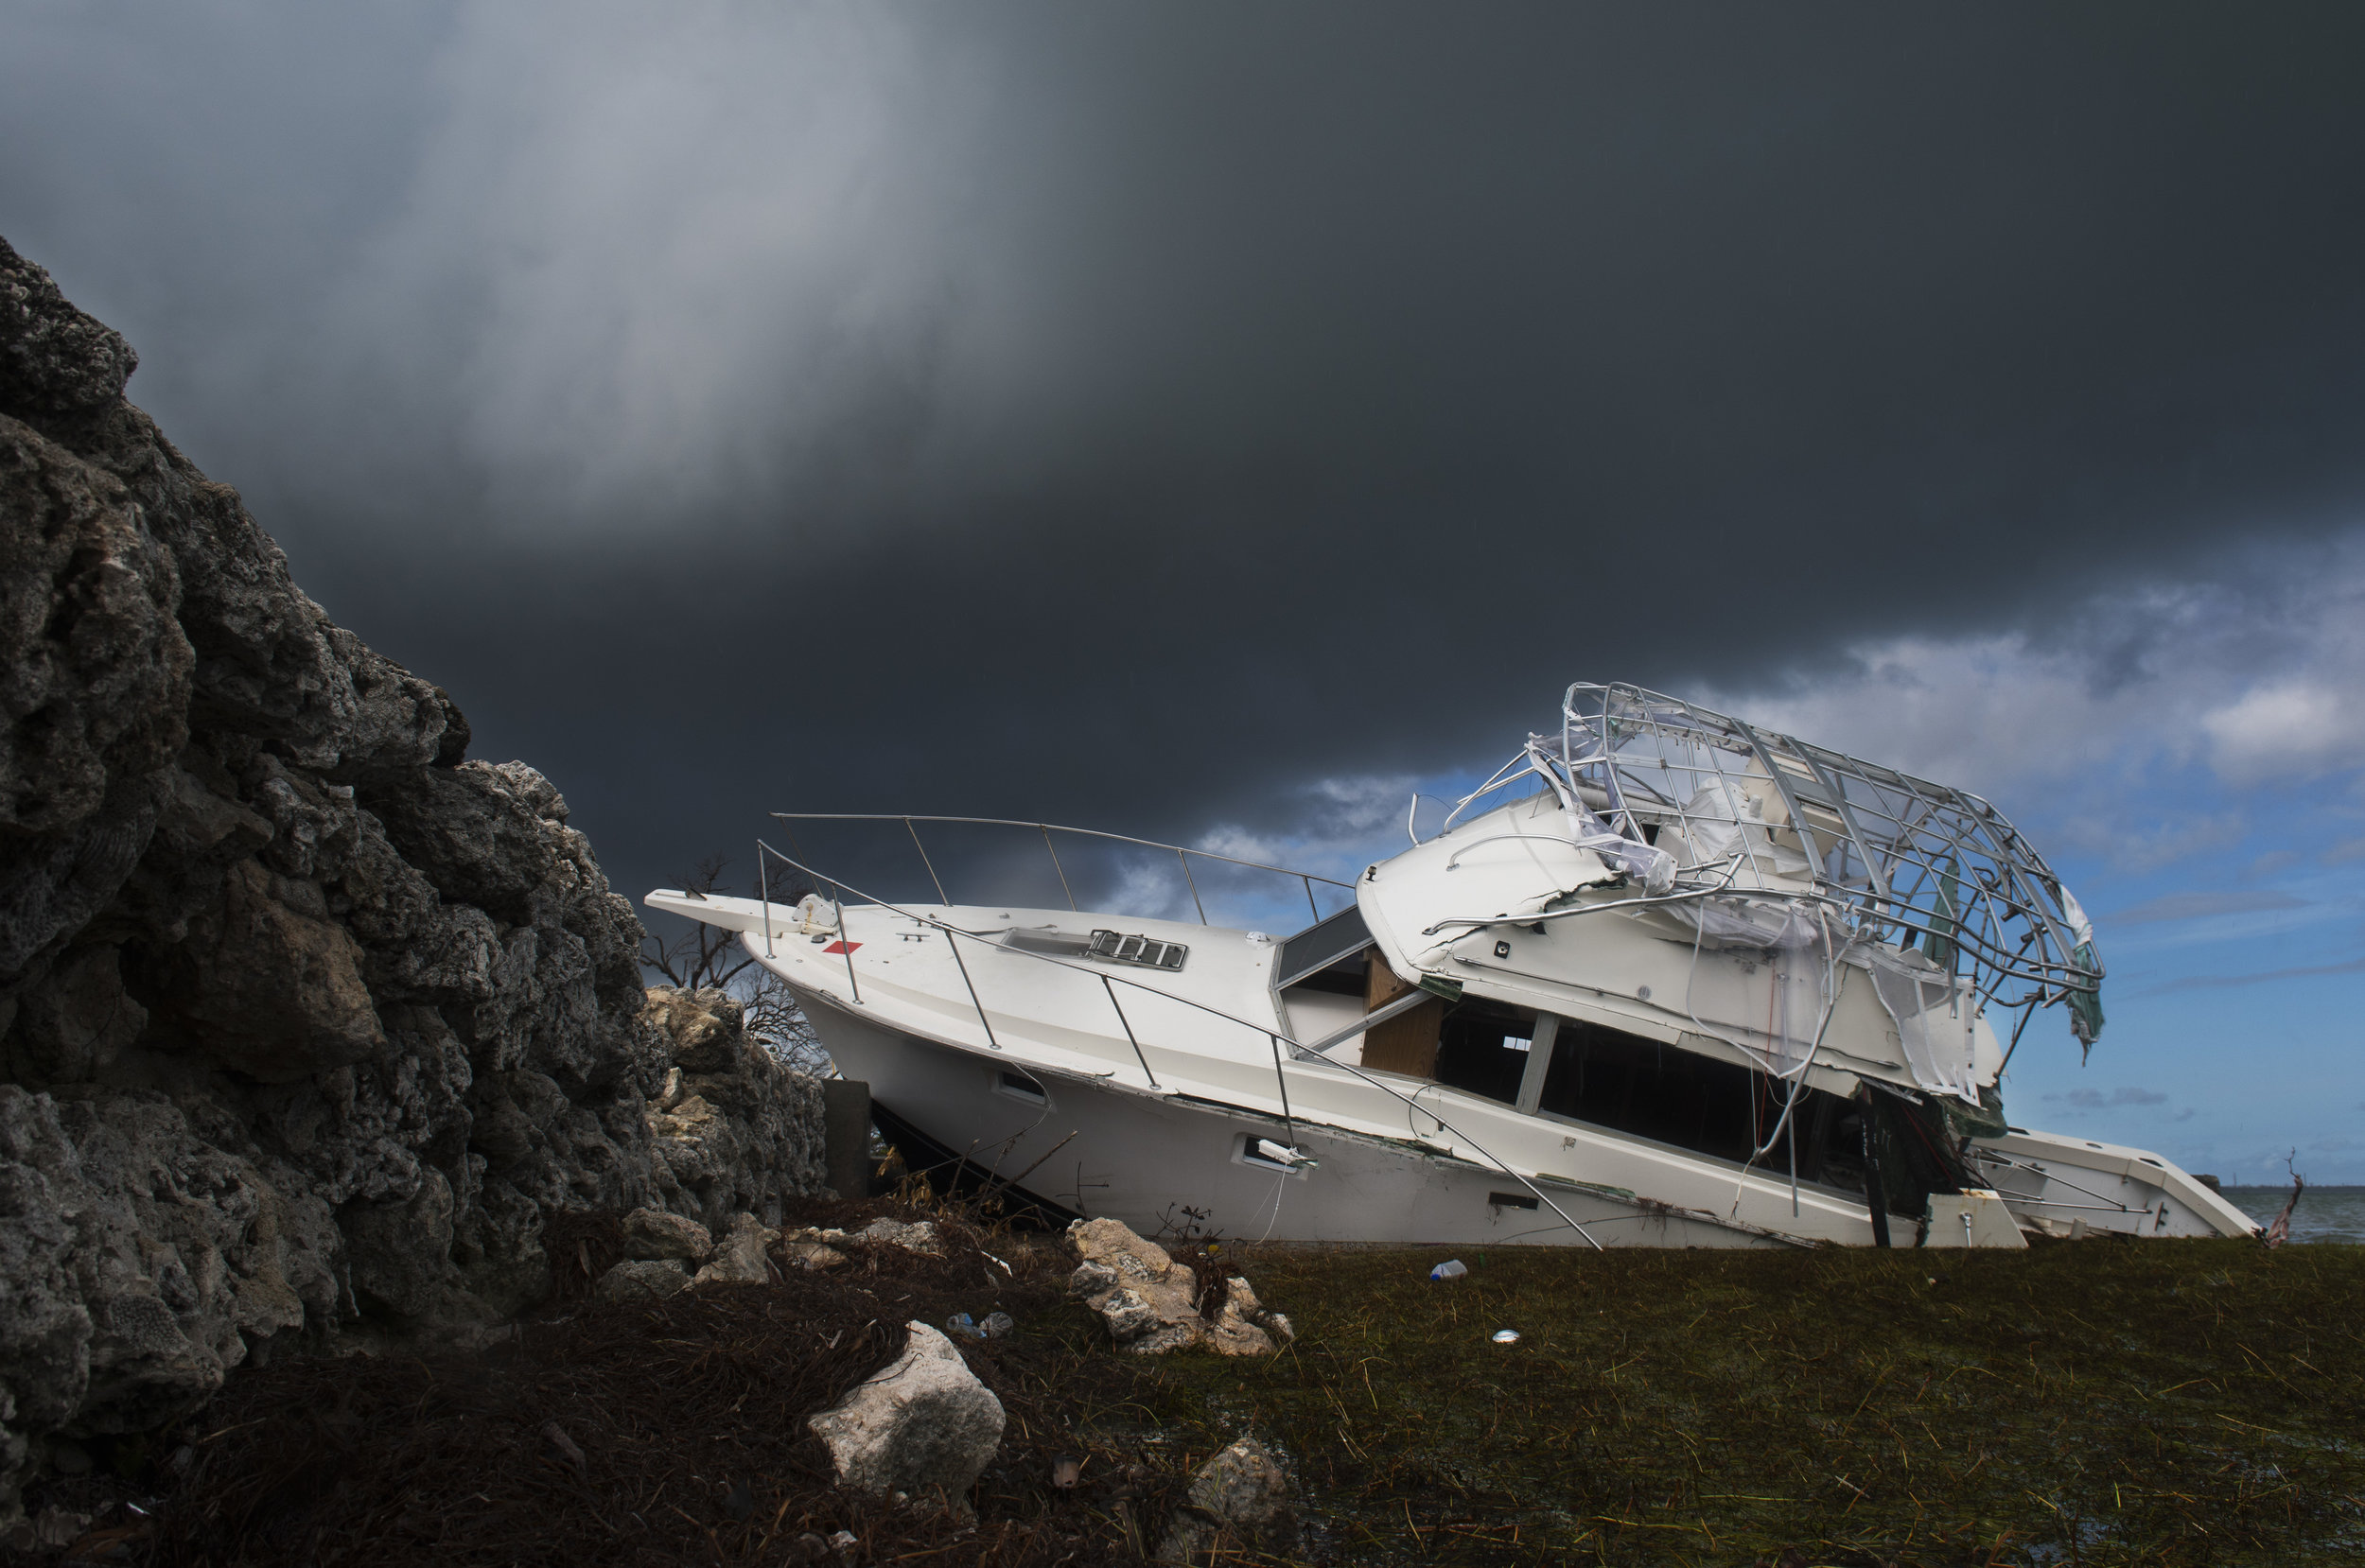  A boat sits capsized near route 1 across the road from the boy-scout reservation on Scout Key. The boat has been featured by numerous media outlets as the vessel was wrecked on an easily accessible piece of shoreline with a little parking lot just i